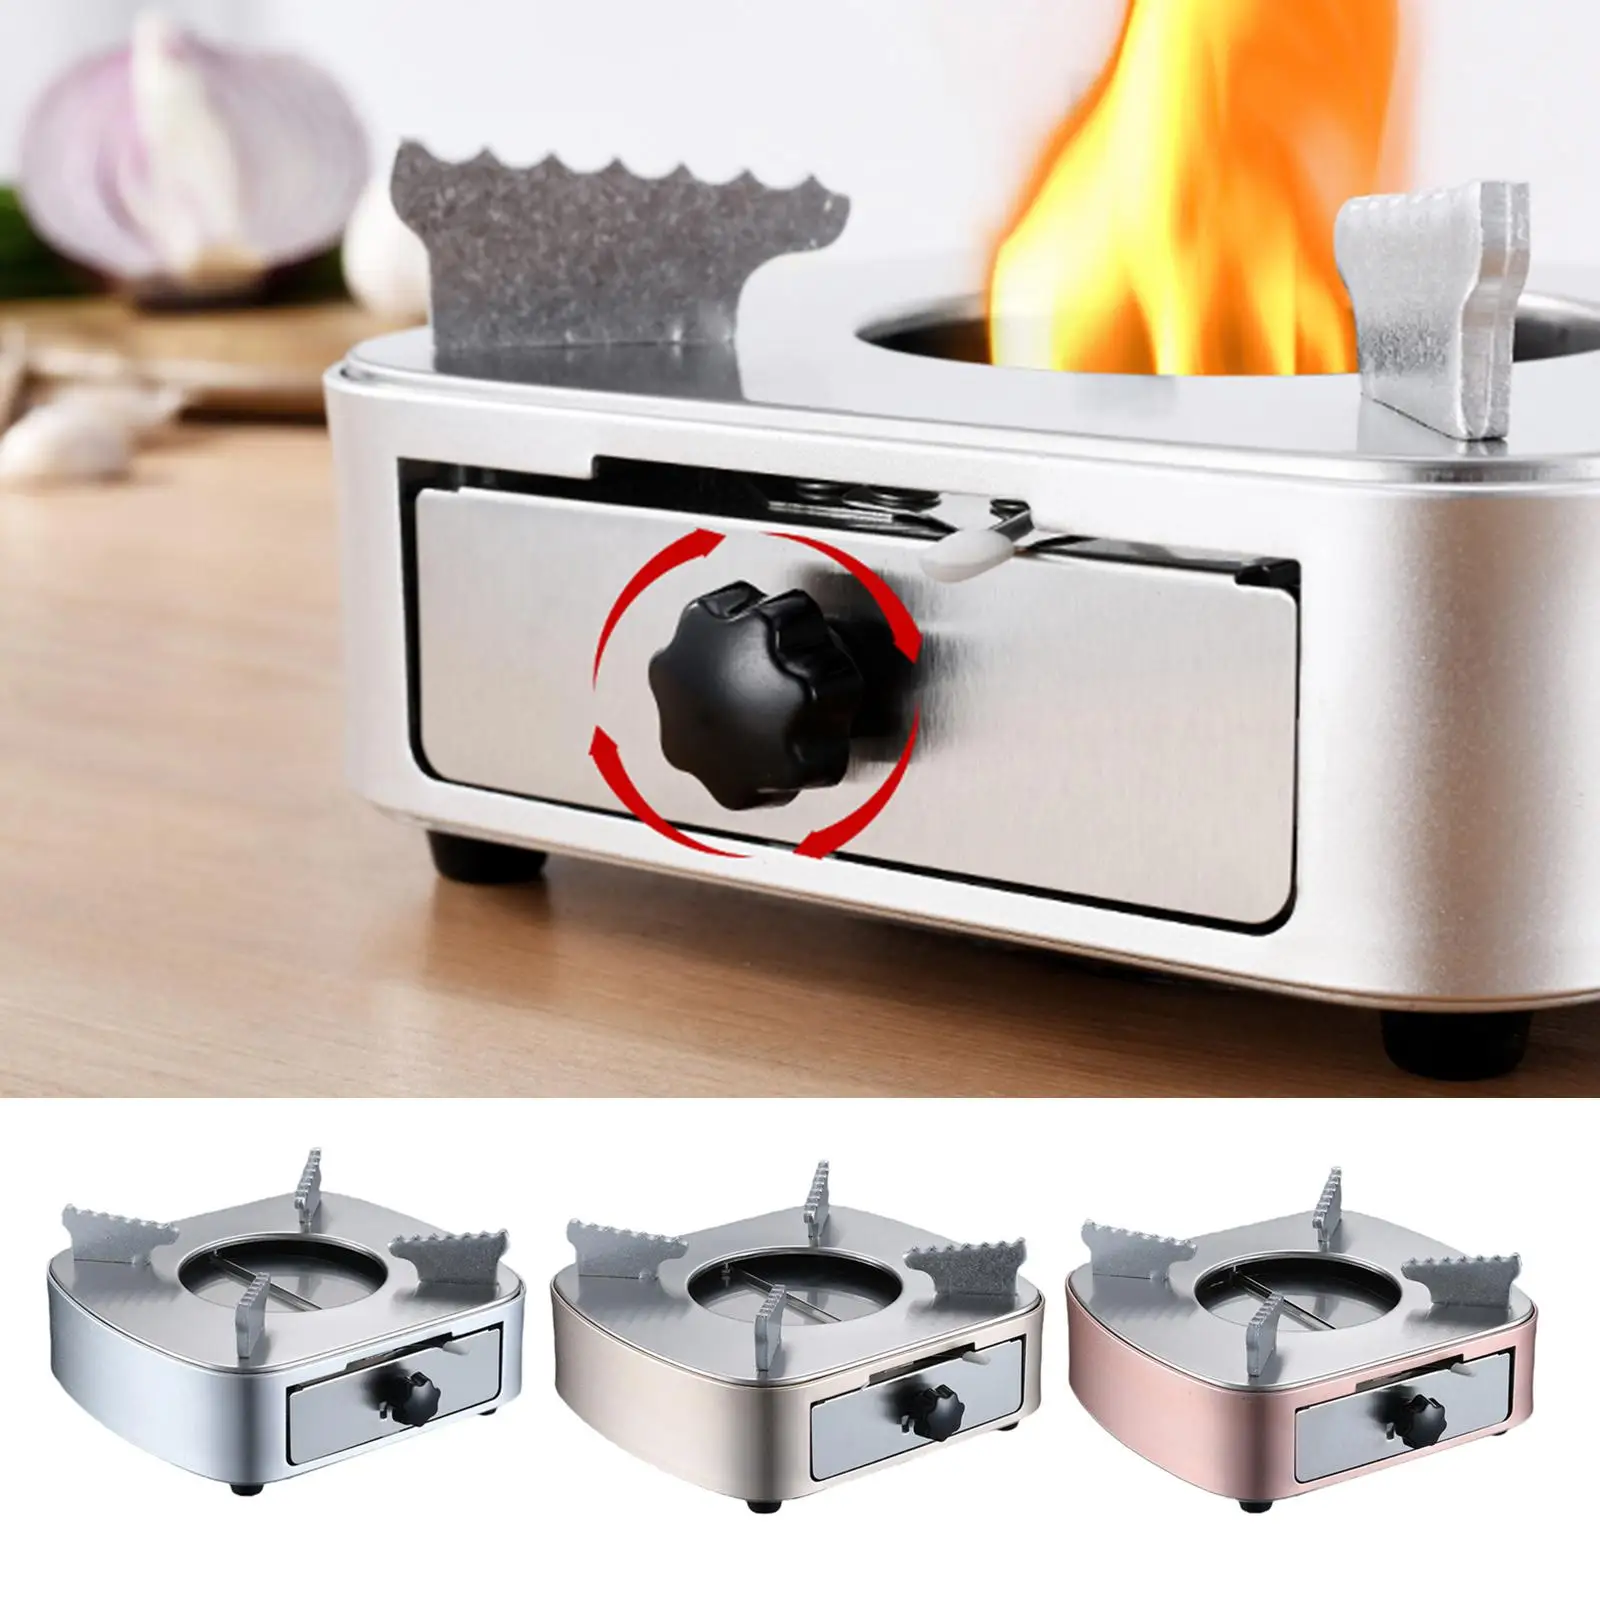 Portable Spirit Burner Alcohol Stove Windproof for Hiking Backpackers Picnic